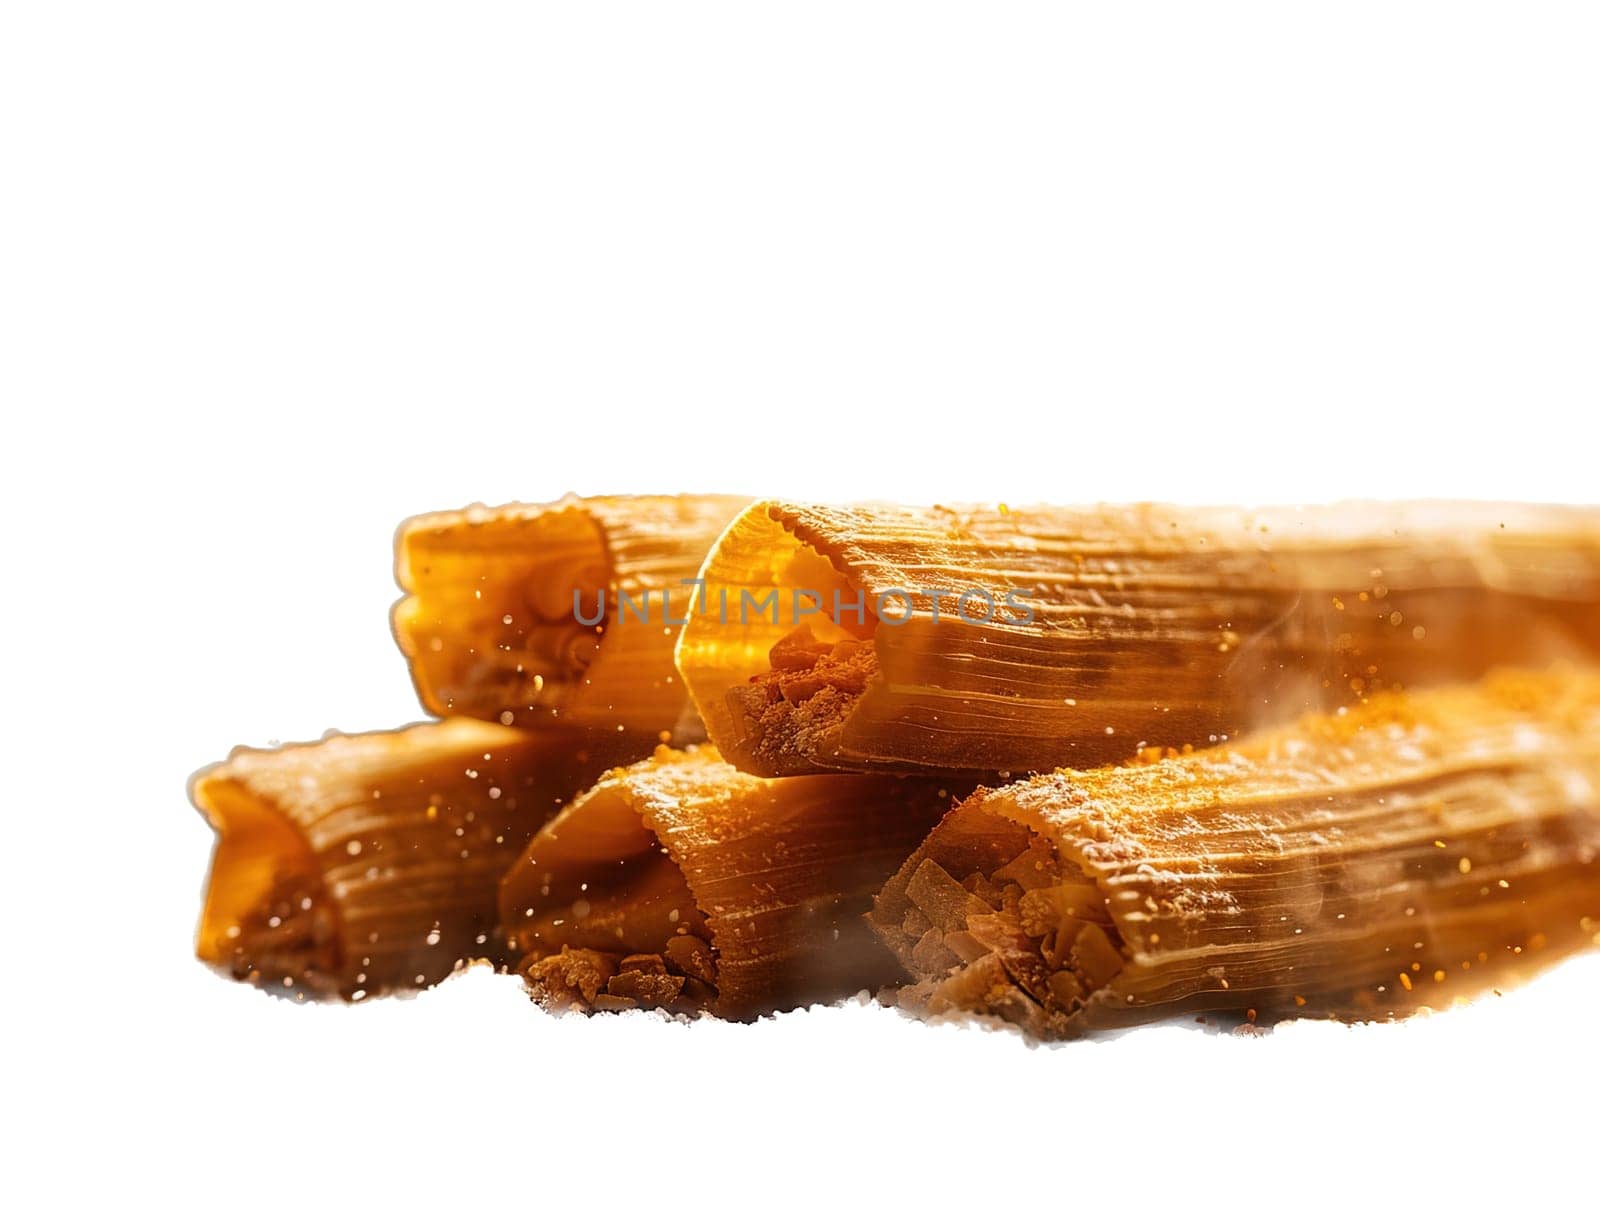 Tamales. Prehispanic dish typical of Mexico. Delicious tamales photography, explosion flavors, studio lighting, studio background, well-lit, vibrant colors, sharp-focus, high-quality, artistic, unique